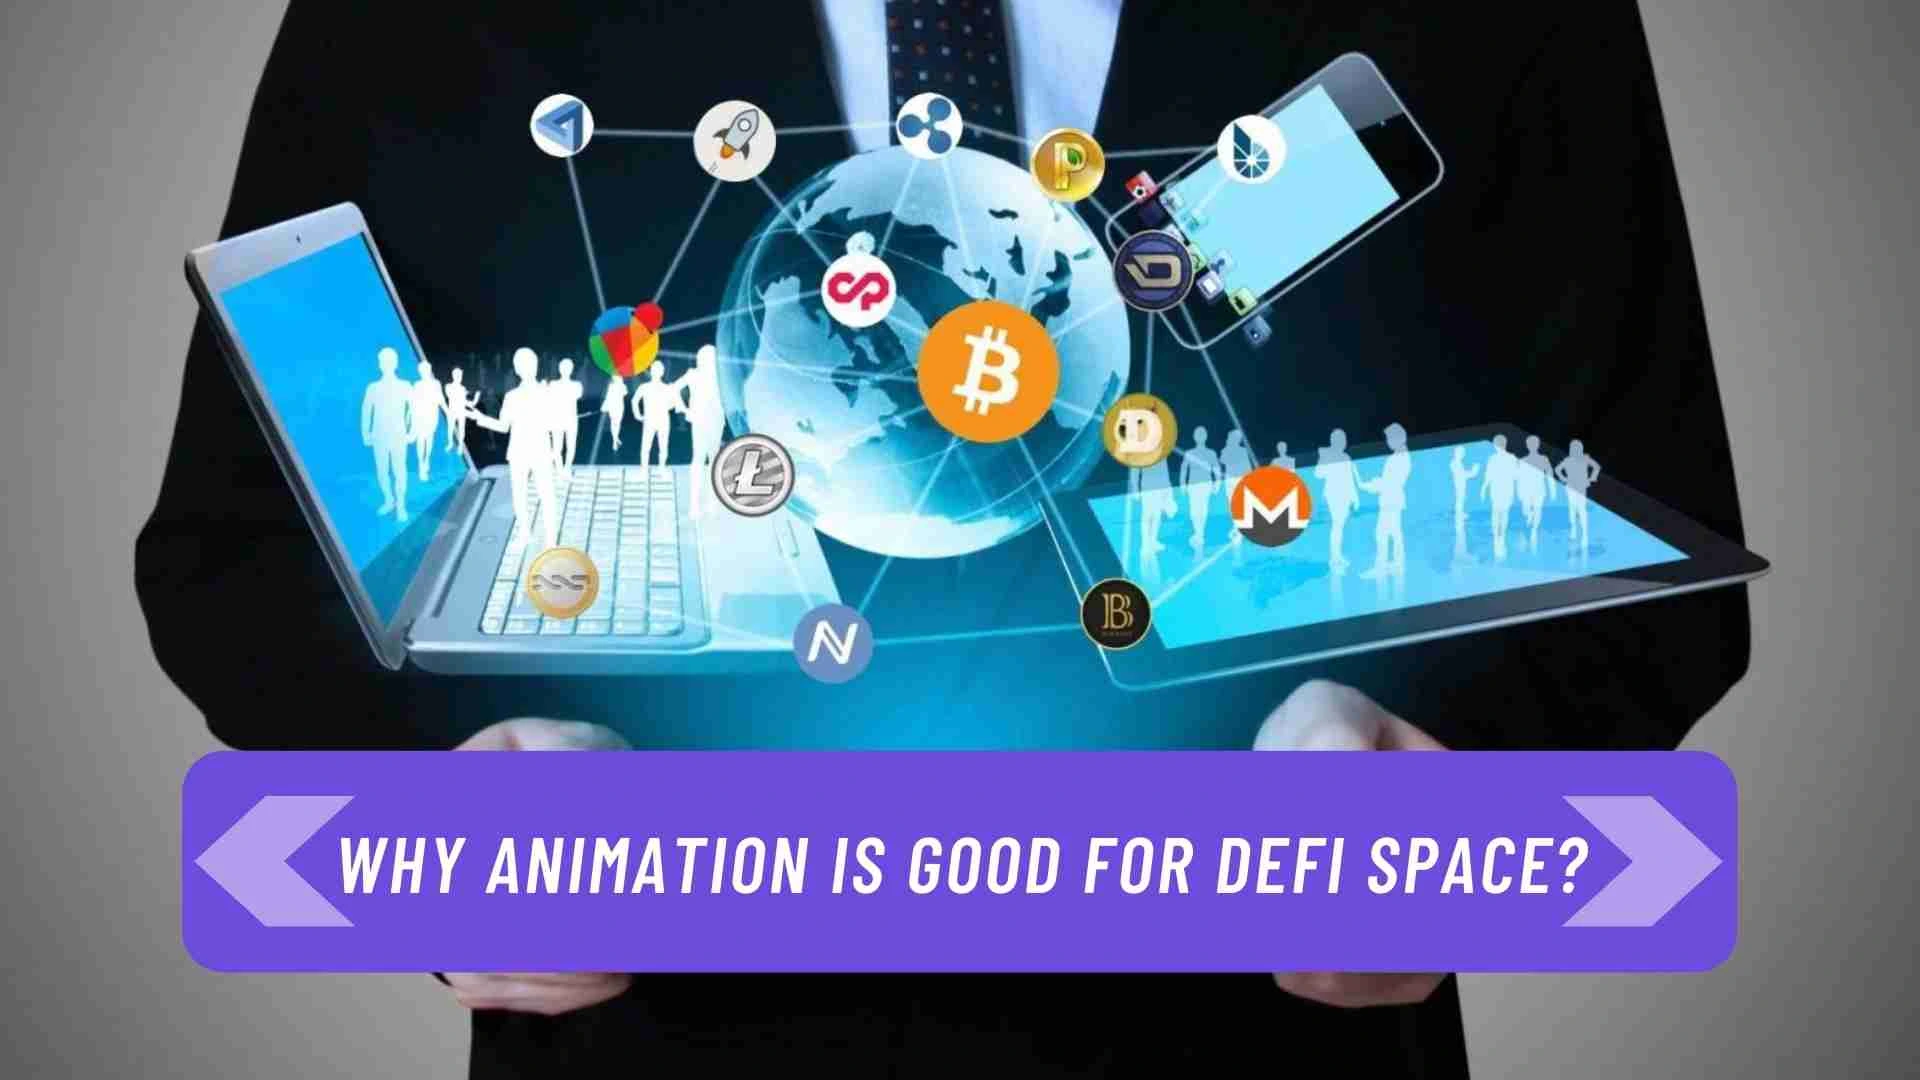 Why is animation and animation video a good fit for DeFi space?